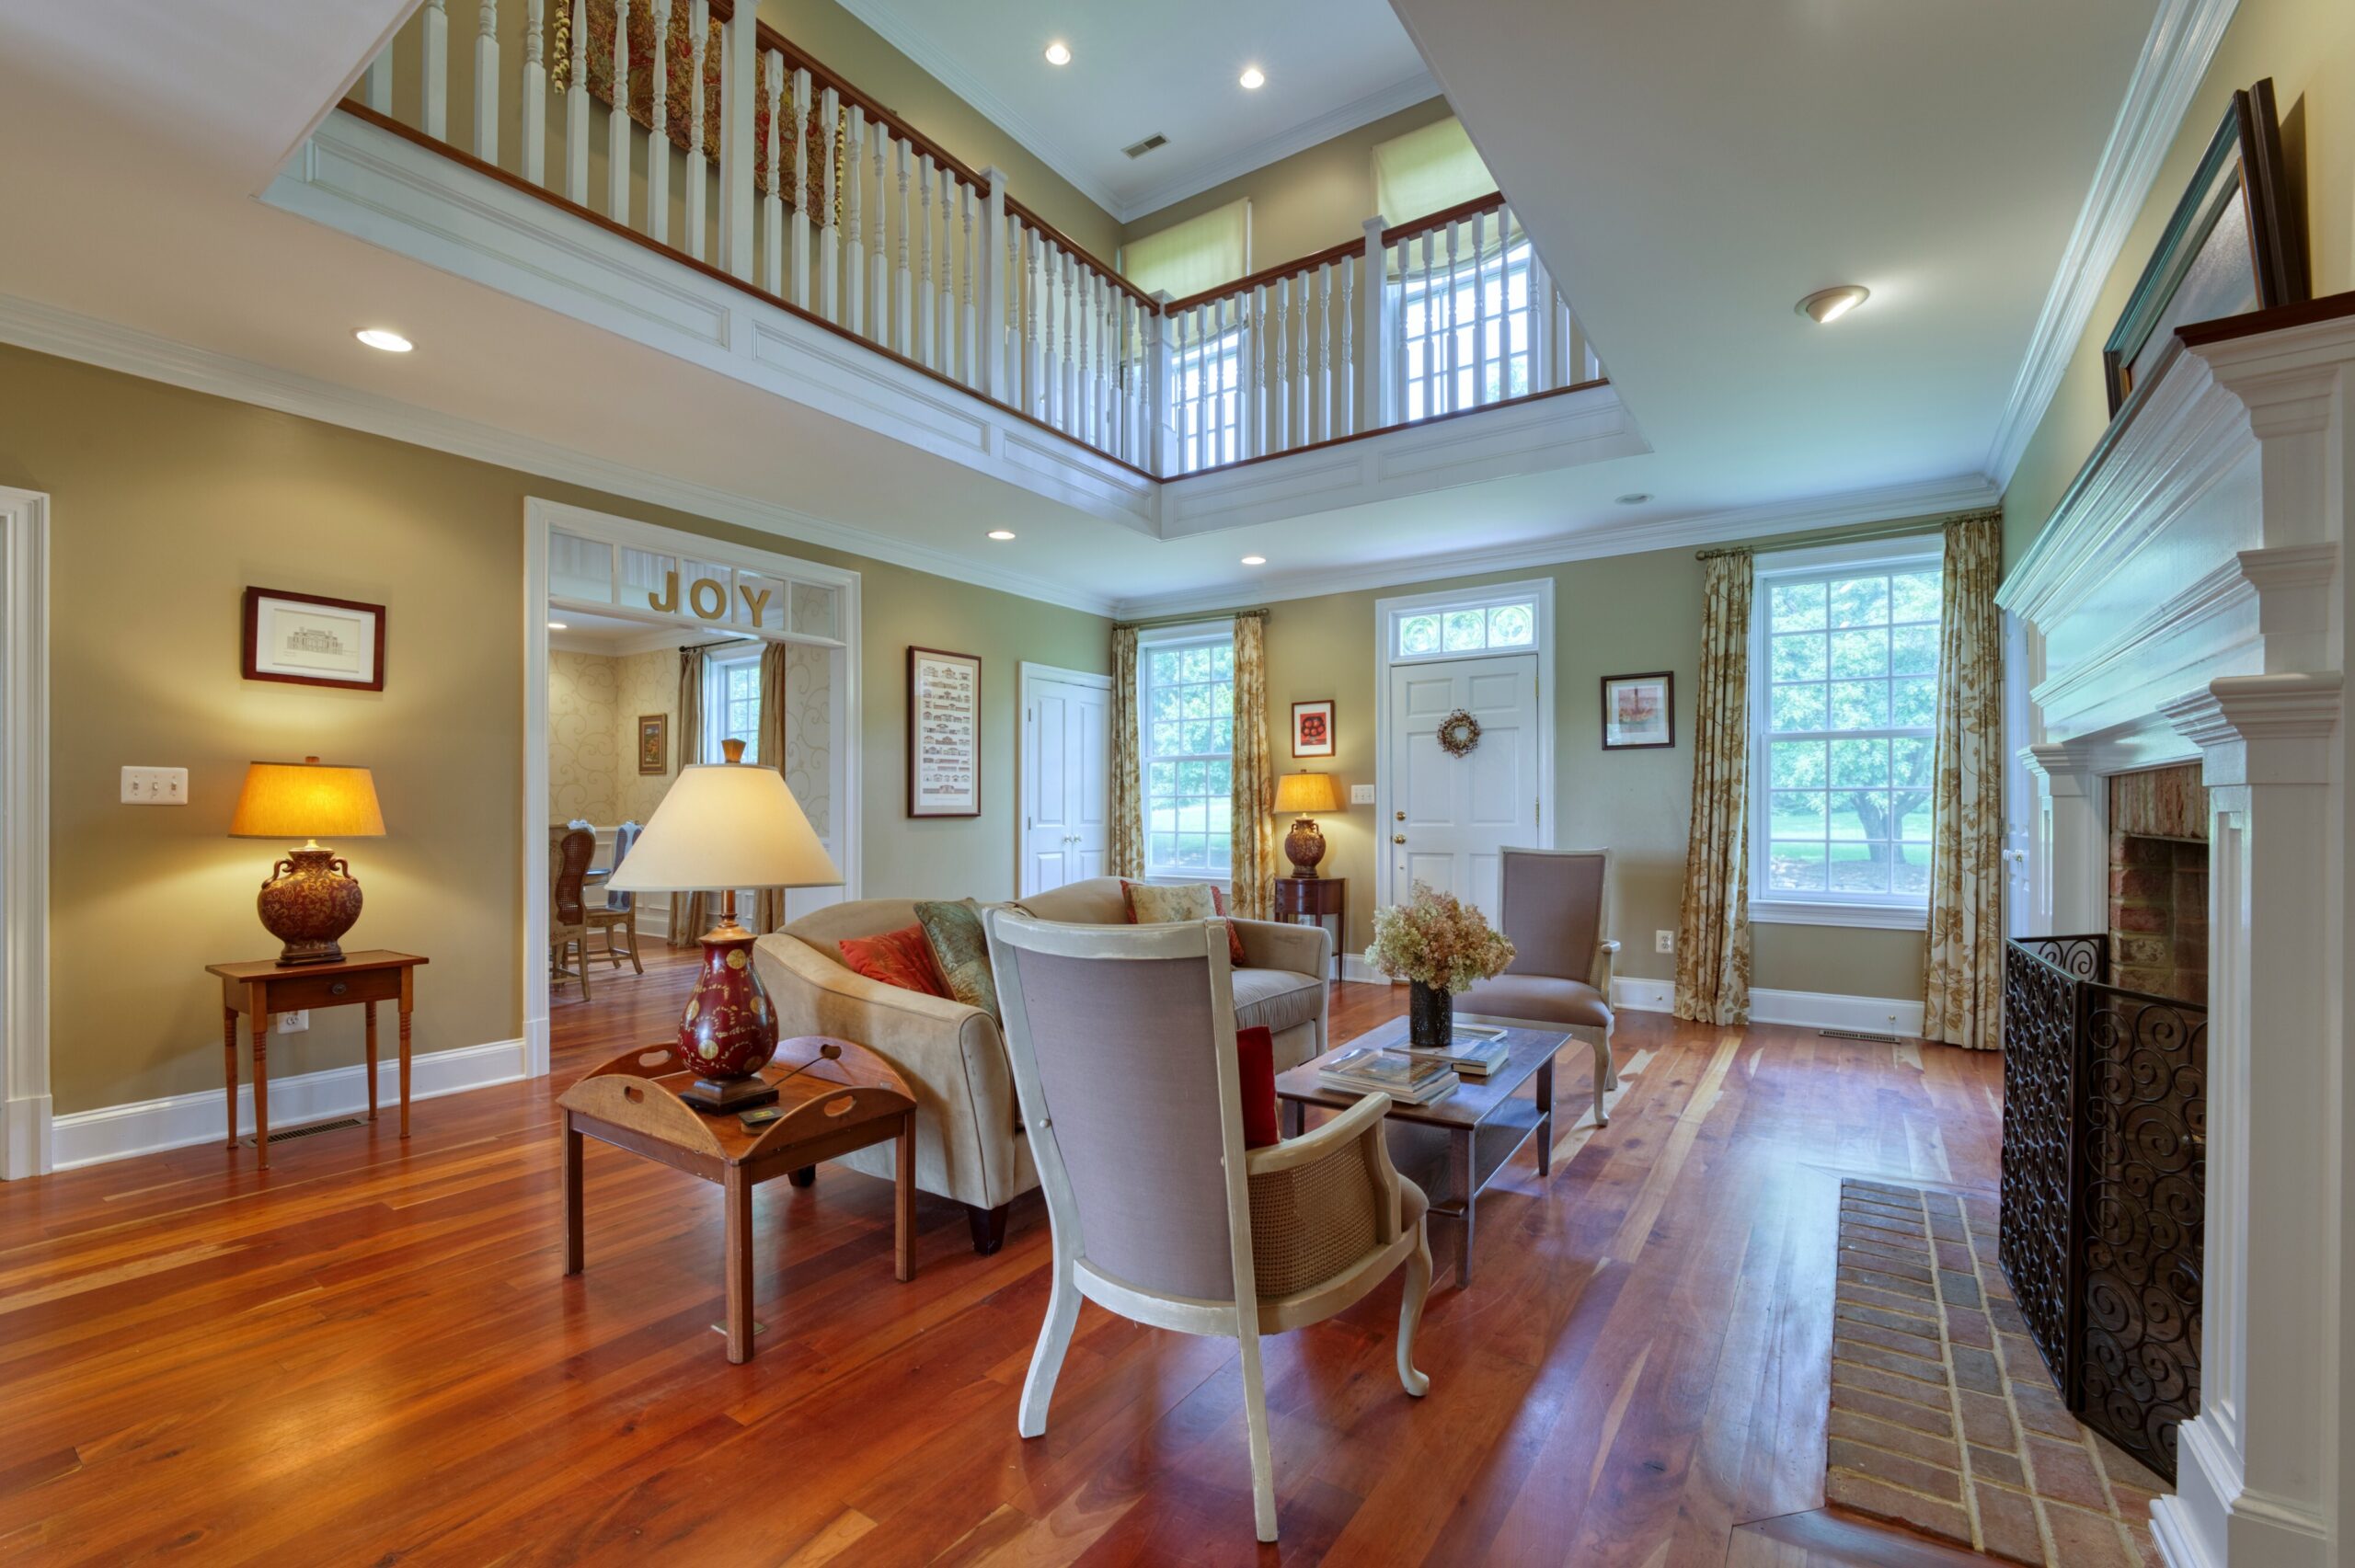 Professional interior photo of 15203 Clover Hill Road - showing the formal living room with cherry hardwood floors and widows walk above